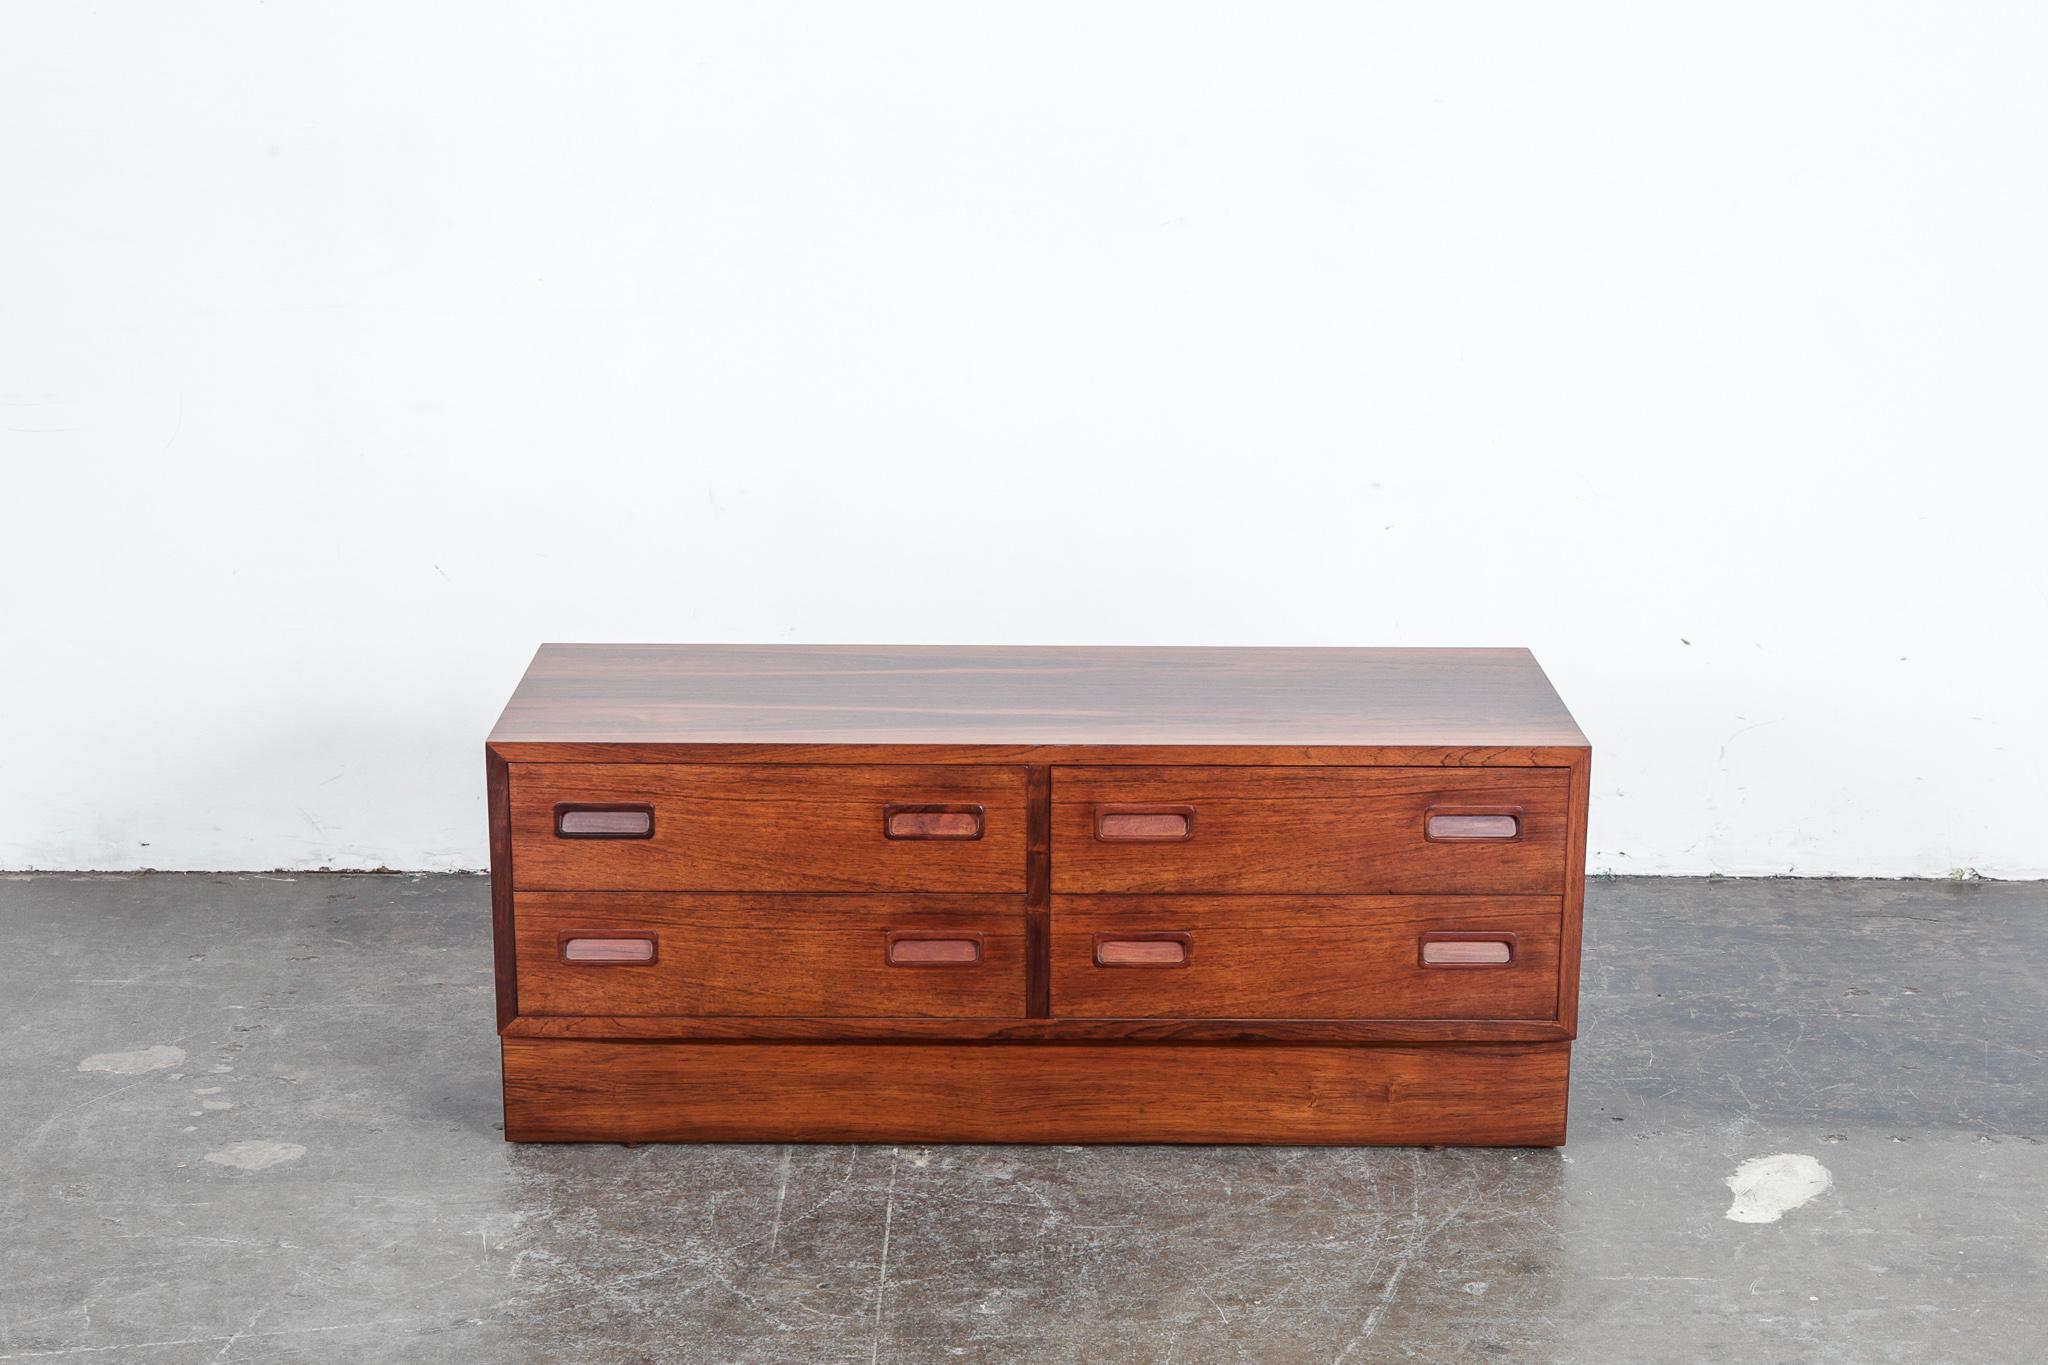 Danish Mid-Century Modern 4-drawer rosewood console designed by Poul Hundevad, 1960s. Newly refinished in lacquer with beautiful strong grain throughout. Danish furniture makers symbol on side of drawer.